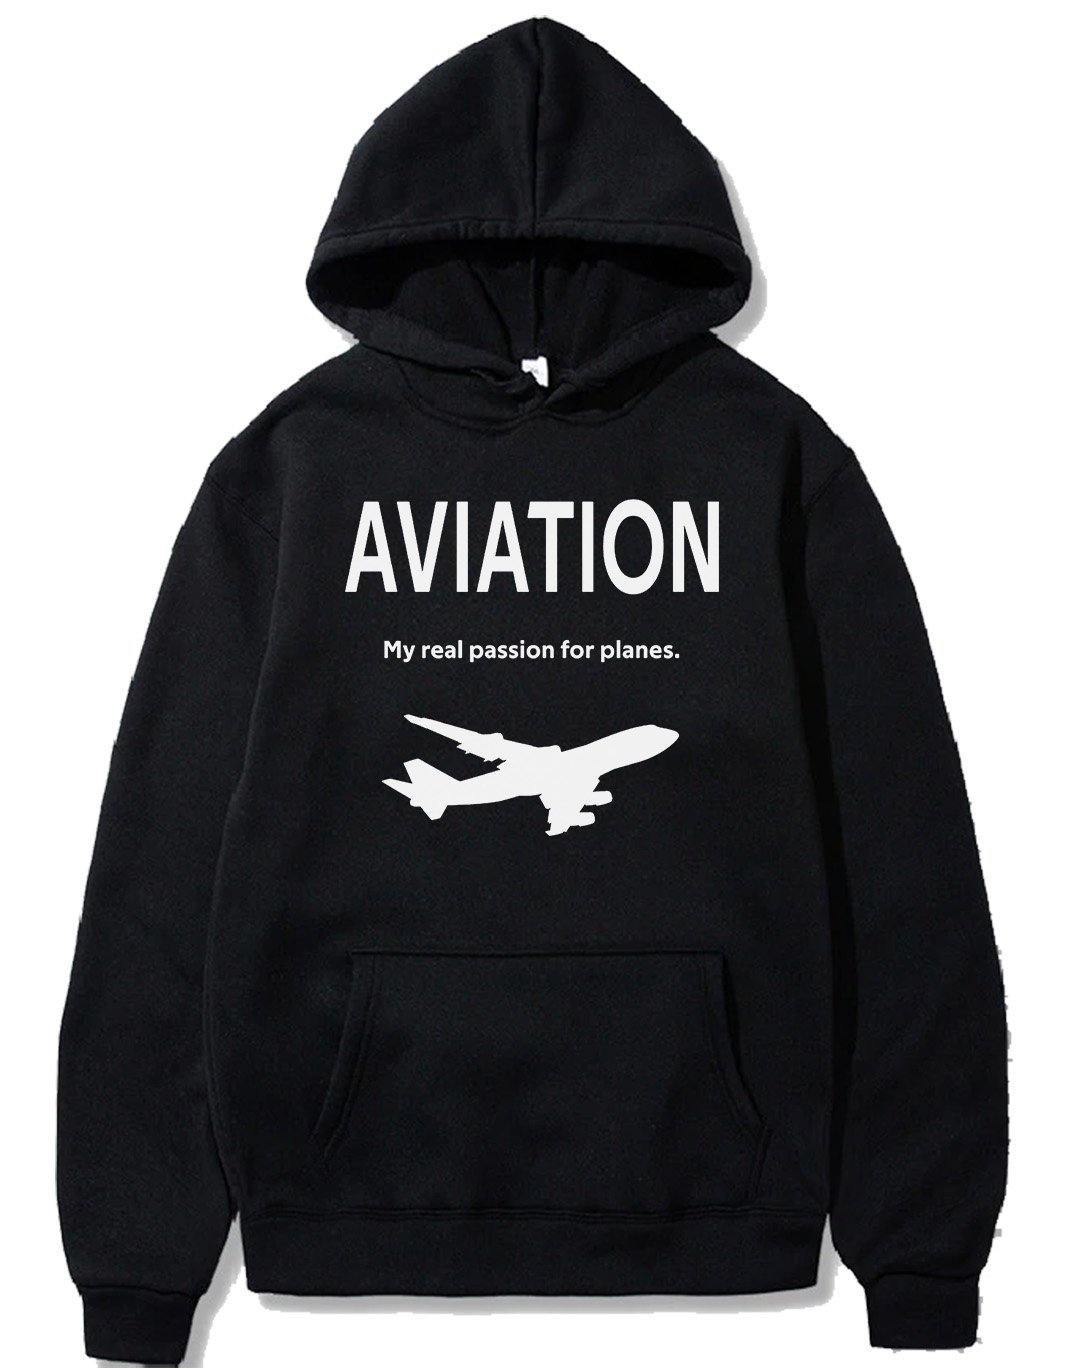 AVIATION MY REAL PASSION FOR PLANES THE AV8R